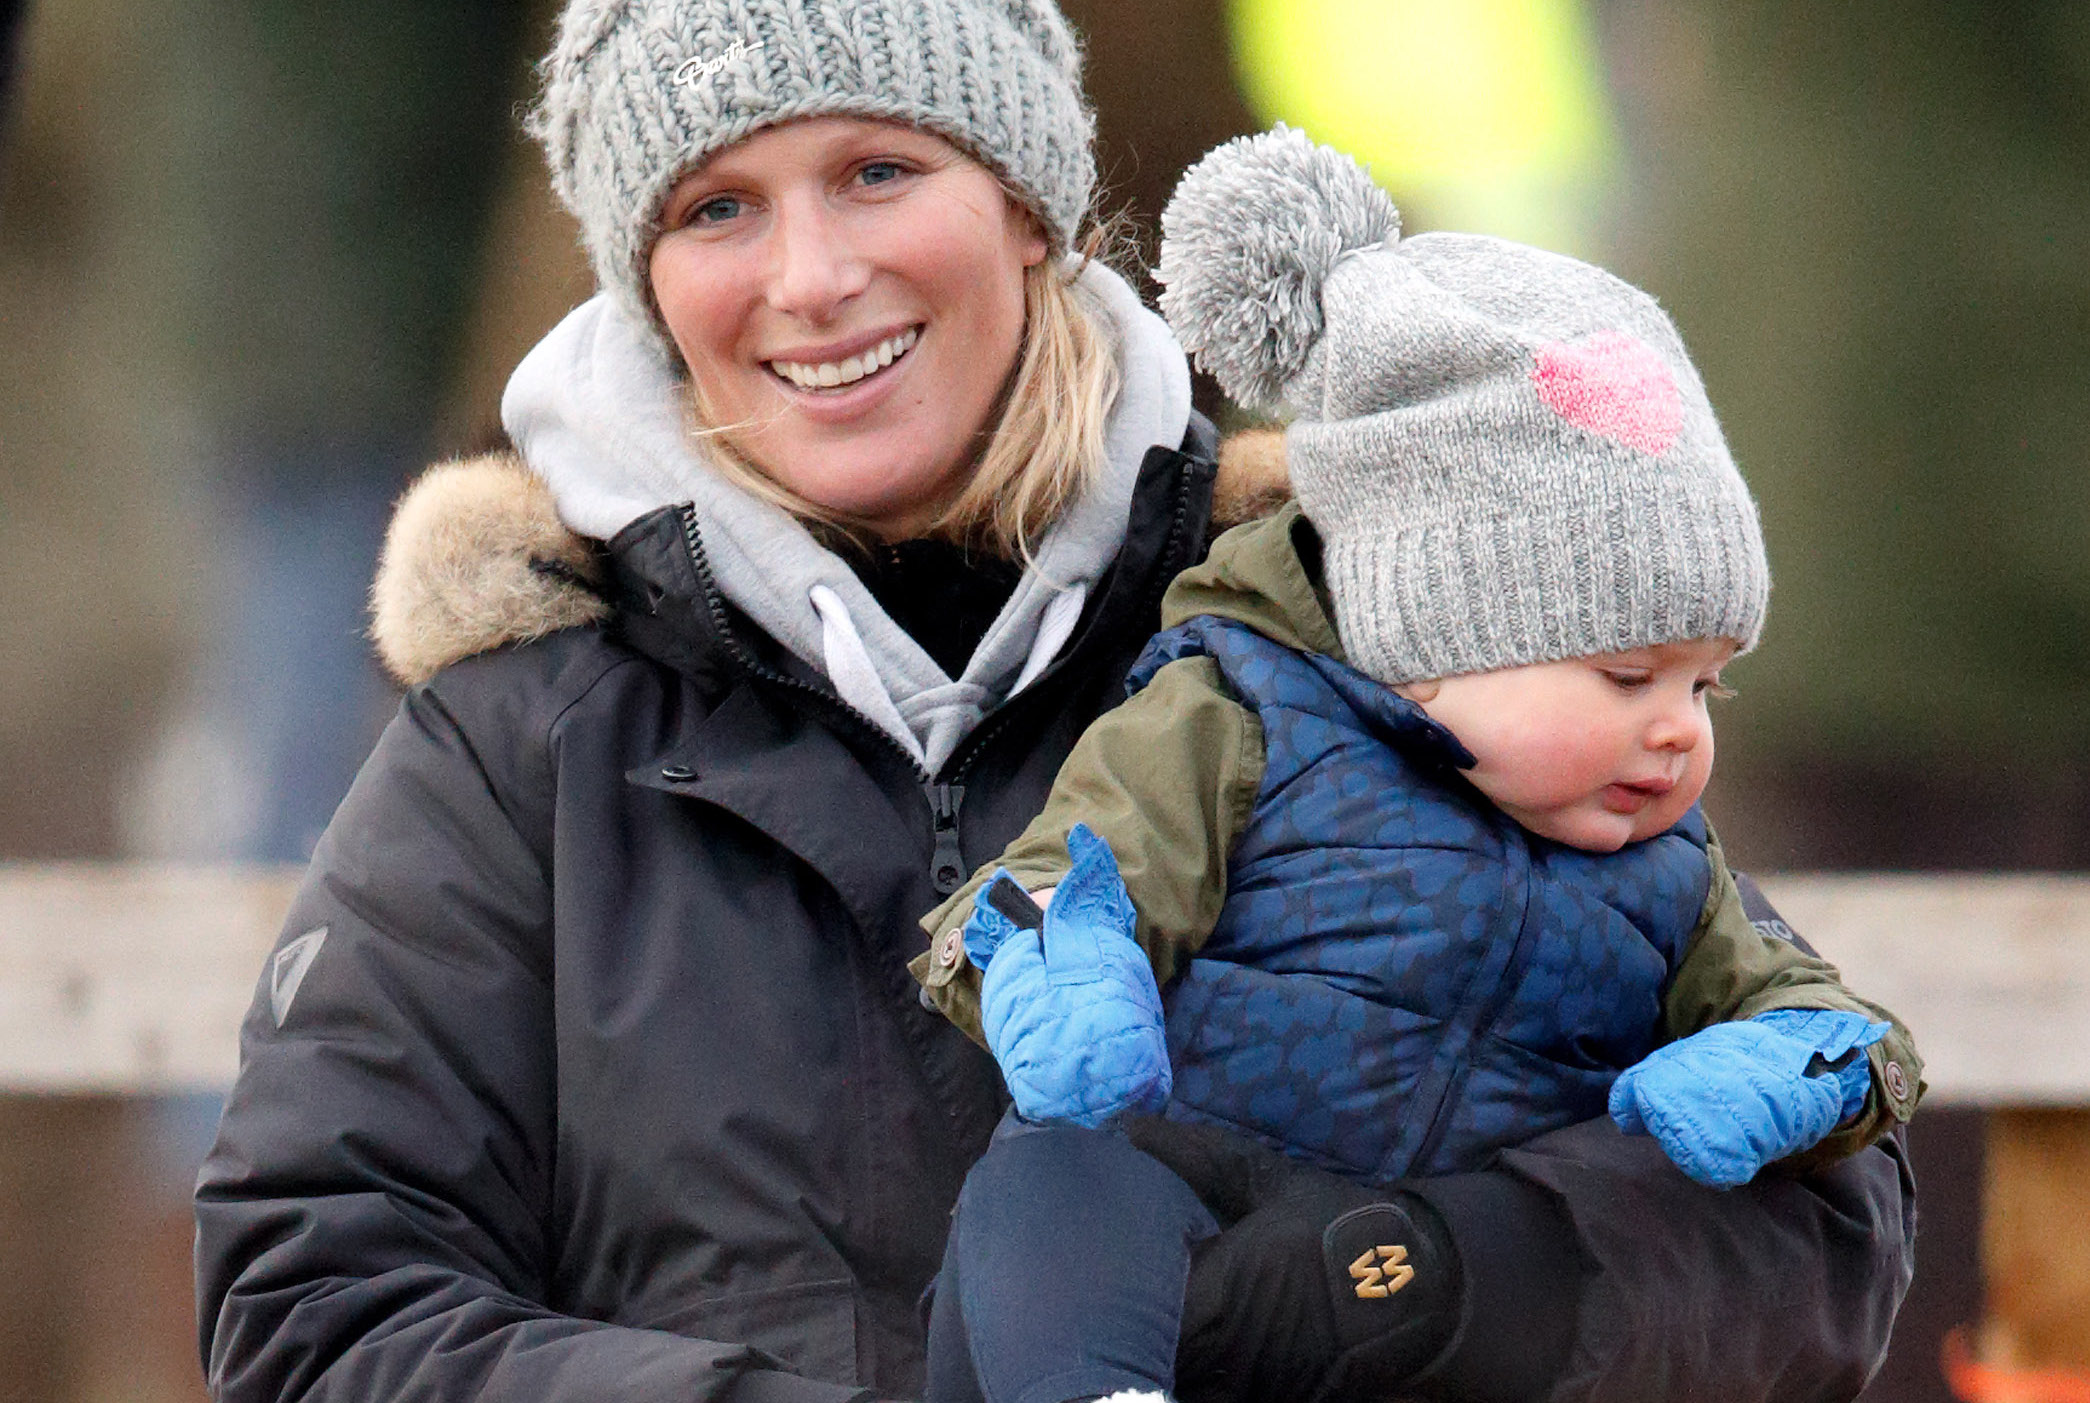 Why Don't Zara Tindall and Her Children Have Royal Titles?